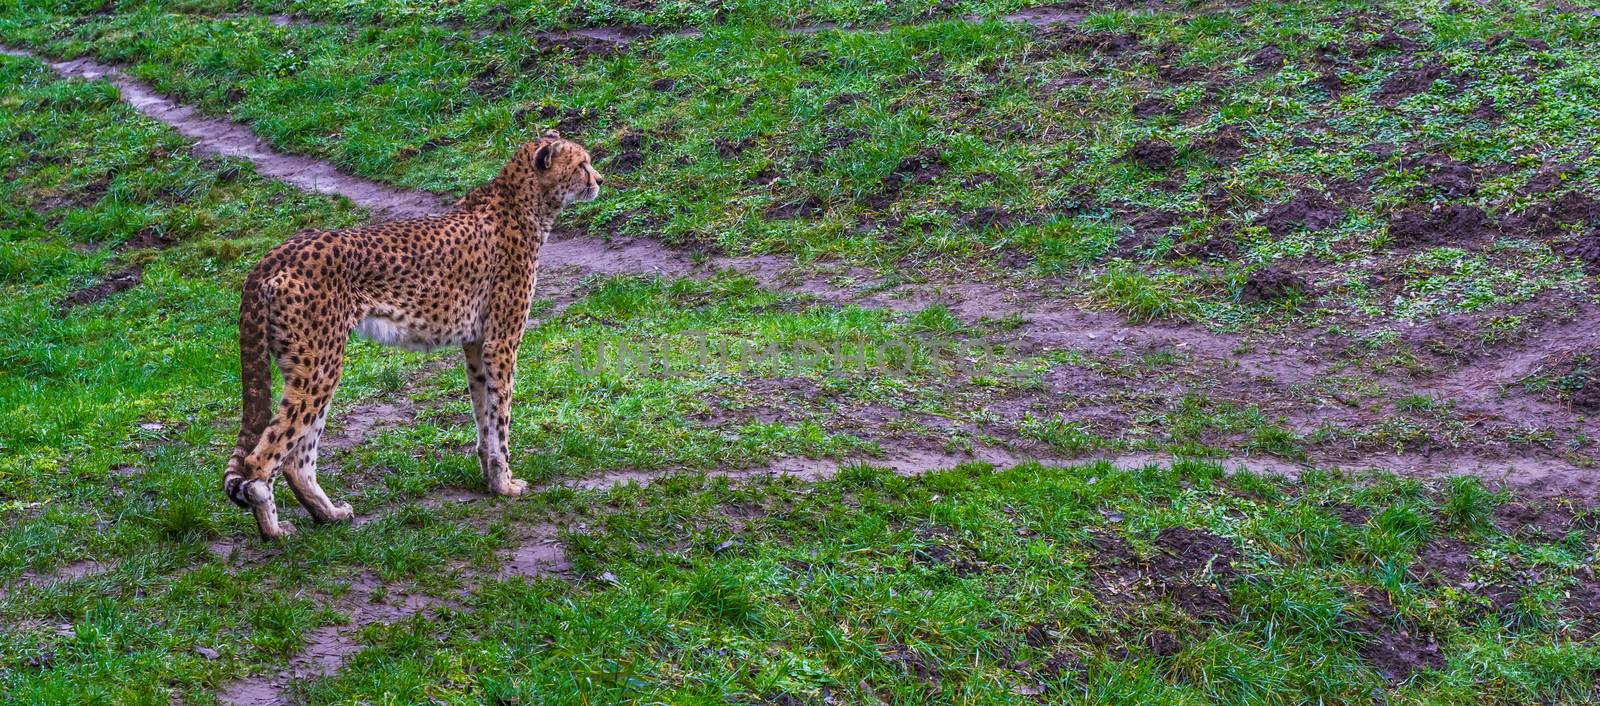 Cheetah standing in a grass pasture, threatened cat specie from Africa by charlottebleijenberg